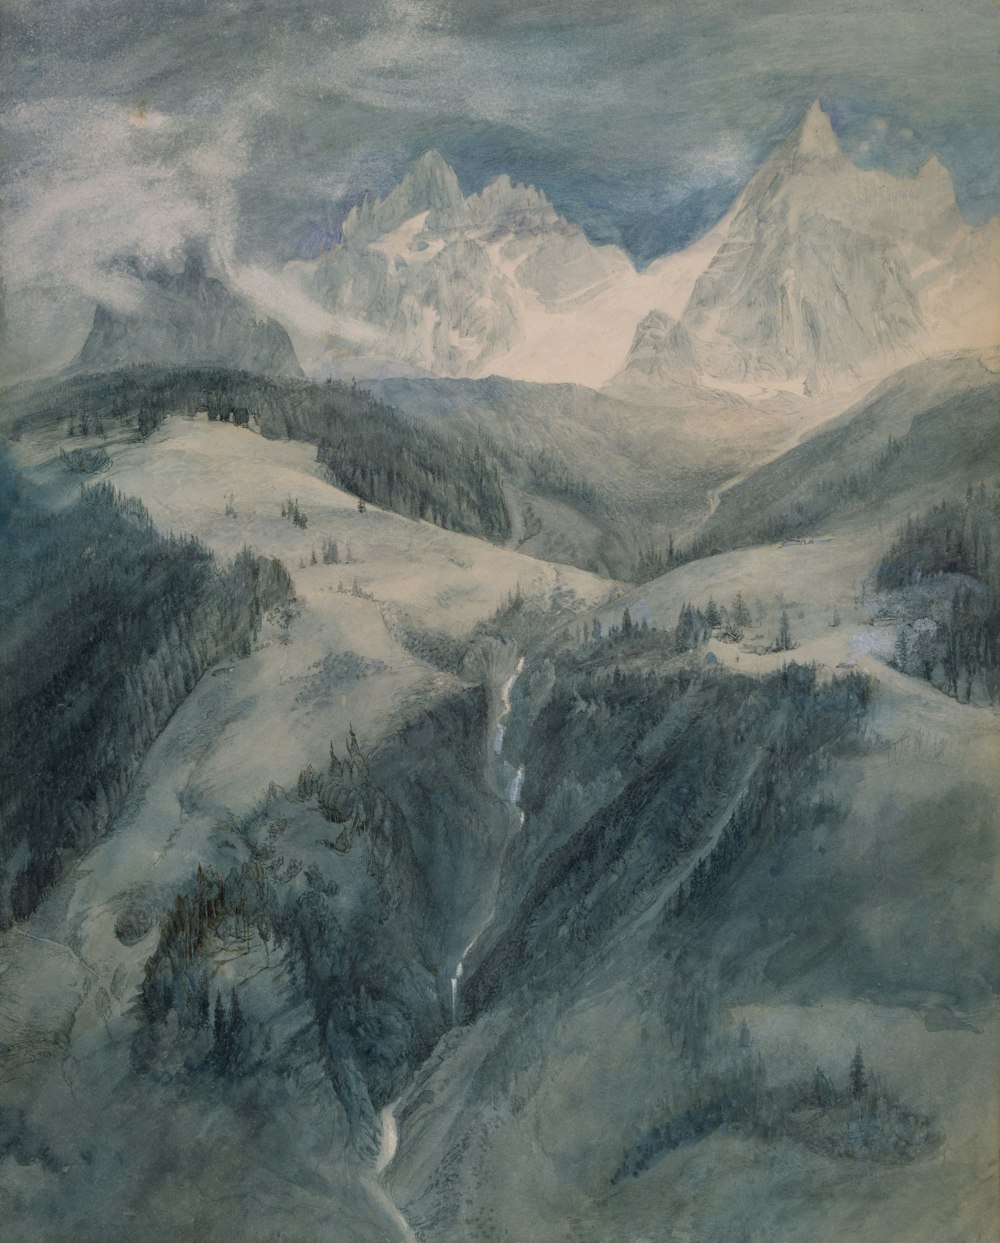 painting of icy mountain